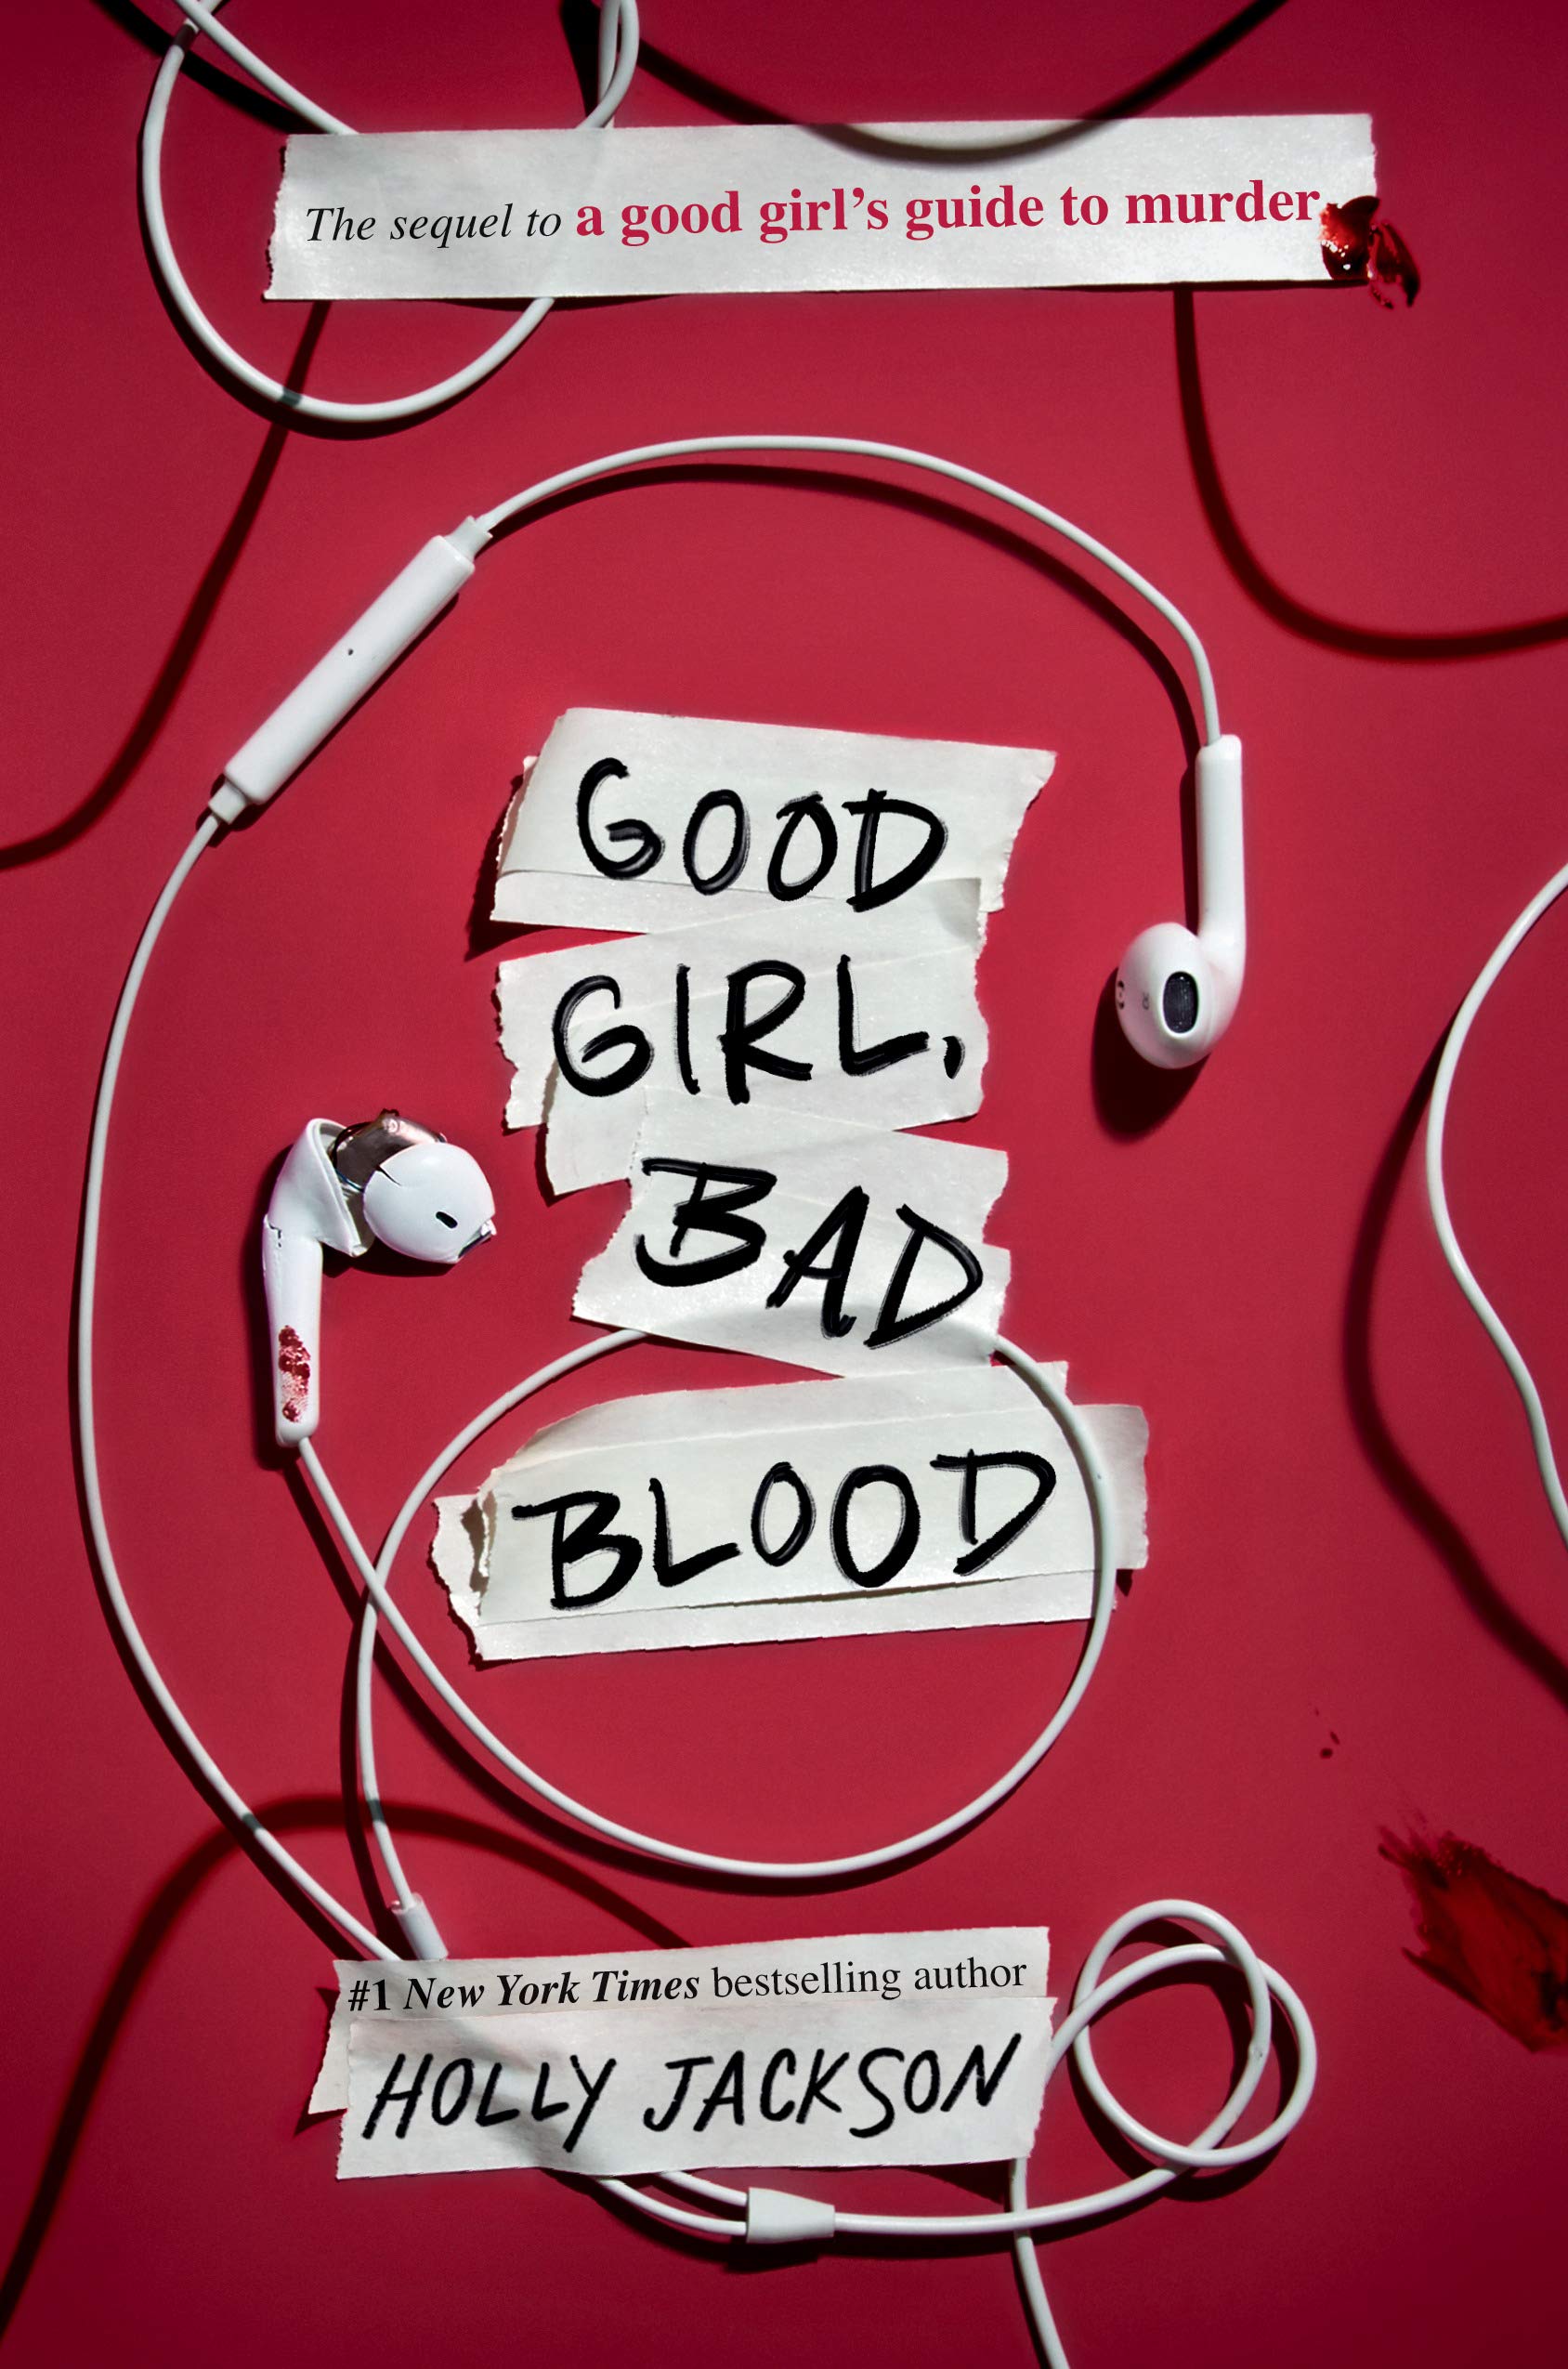 Good Girl, Bad Blood: The Sequel to A Good Girl's Guide to Murder Hardcover by Holly Jackson